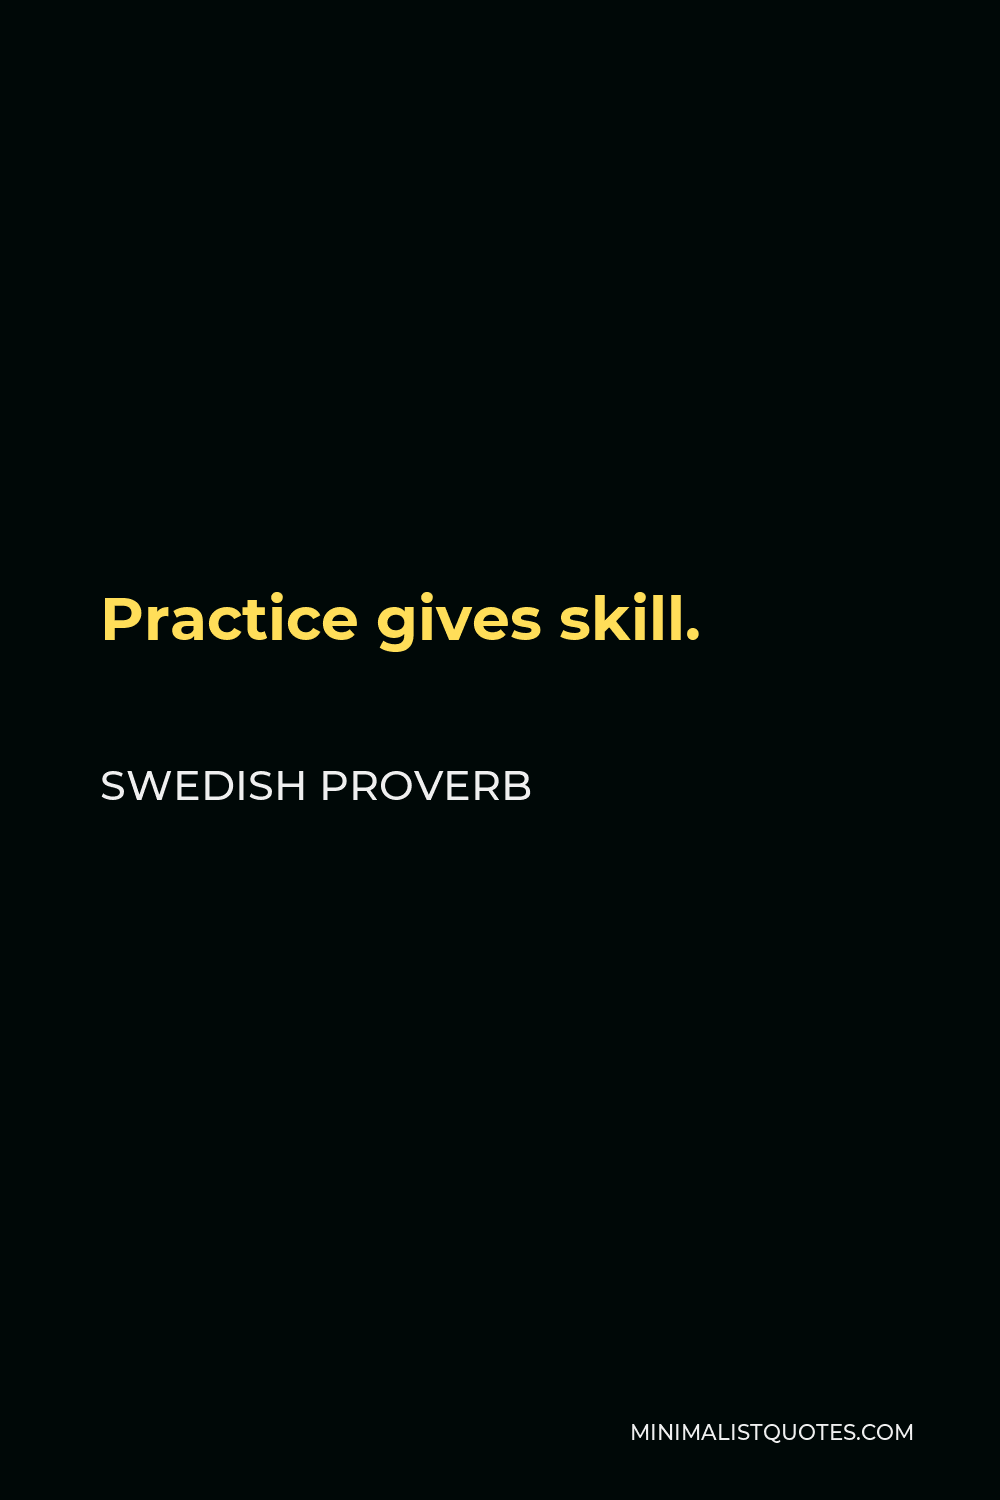 Swedish Proverb Quote - Practice gives skill.